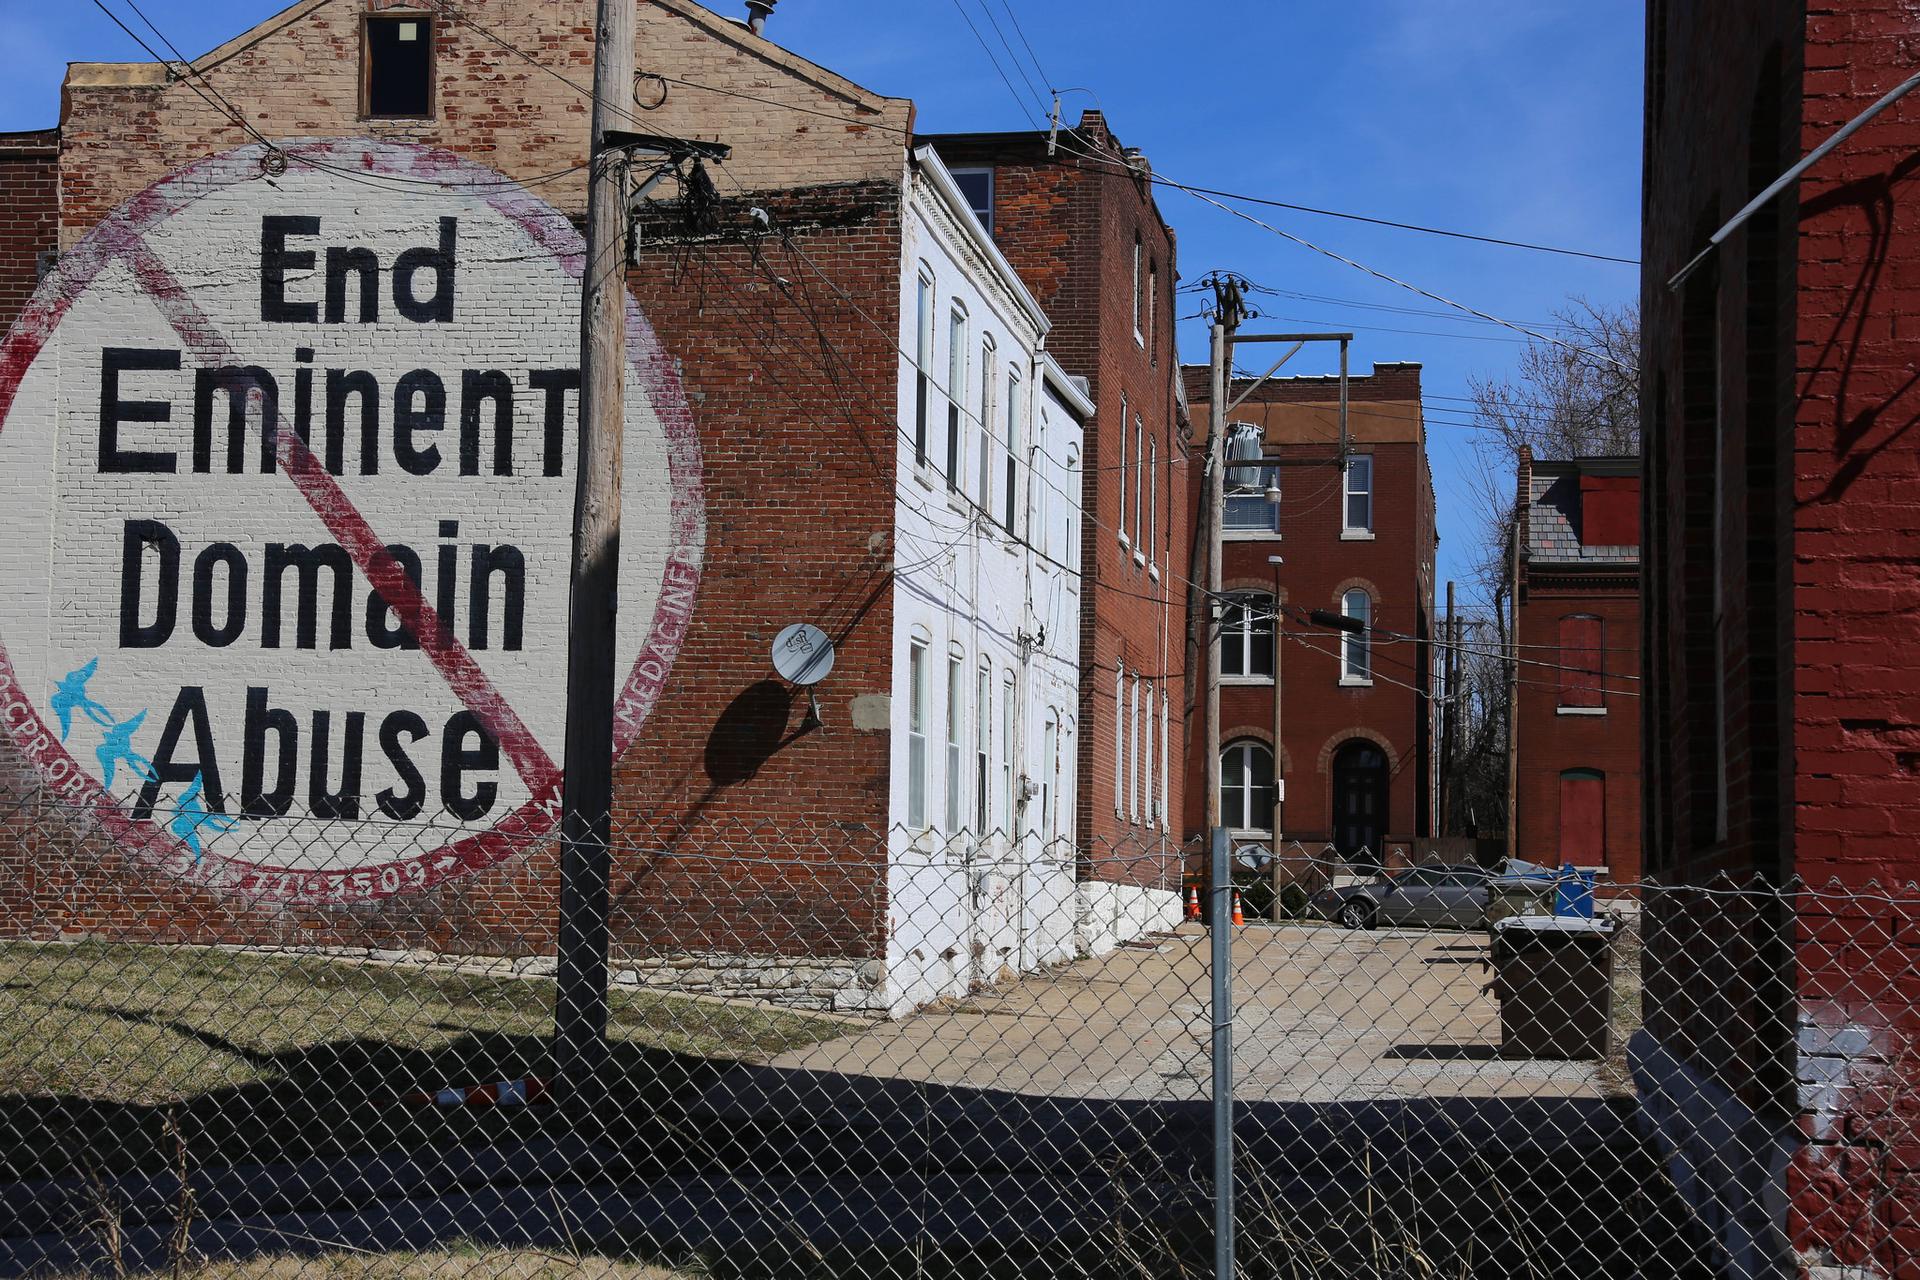 A brick building with hand-painted sign: End Eminent Domain Abuse